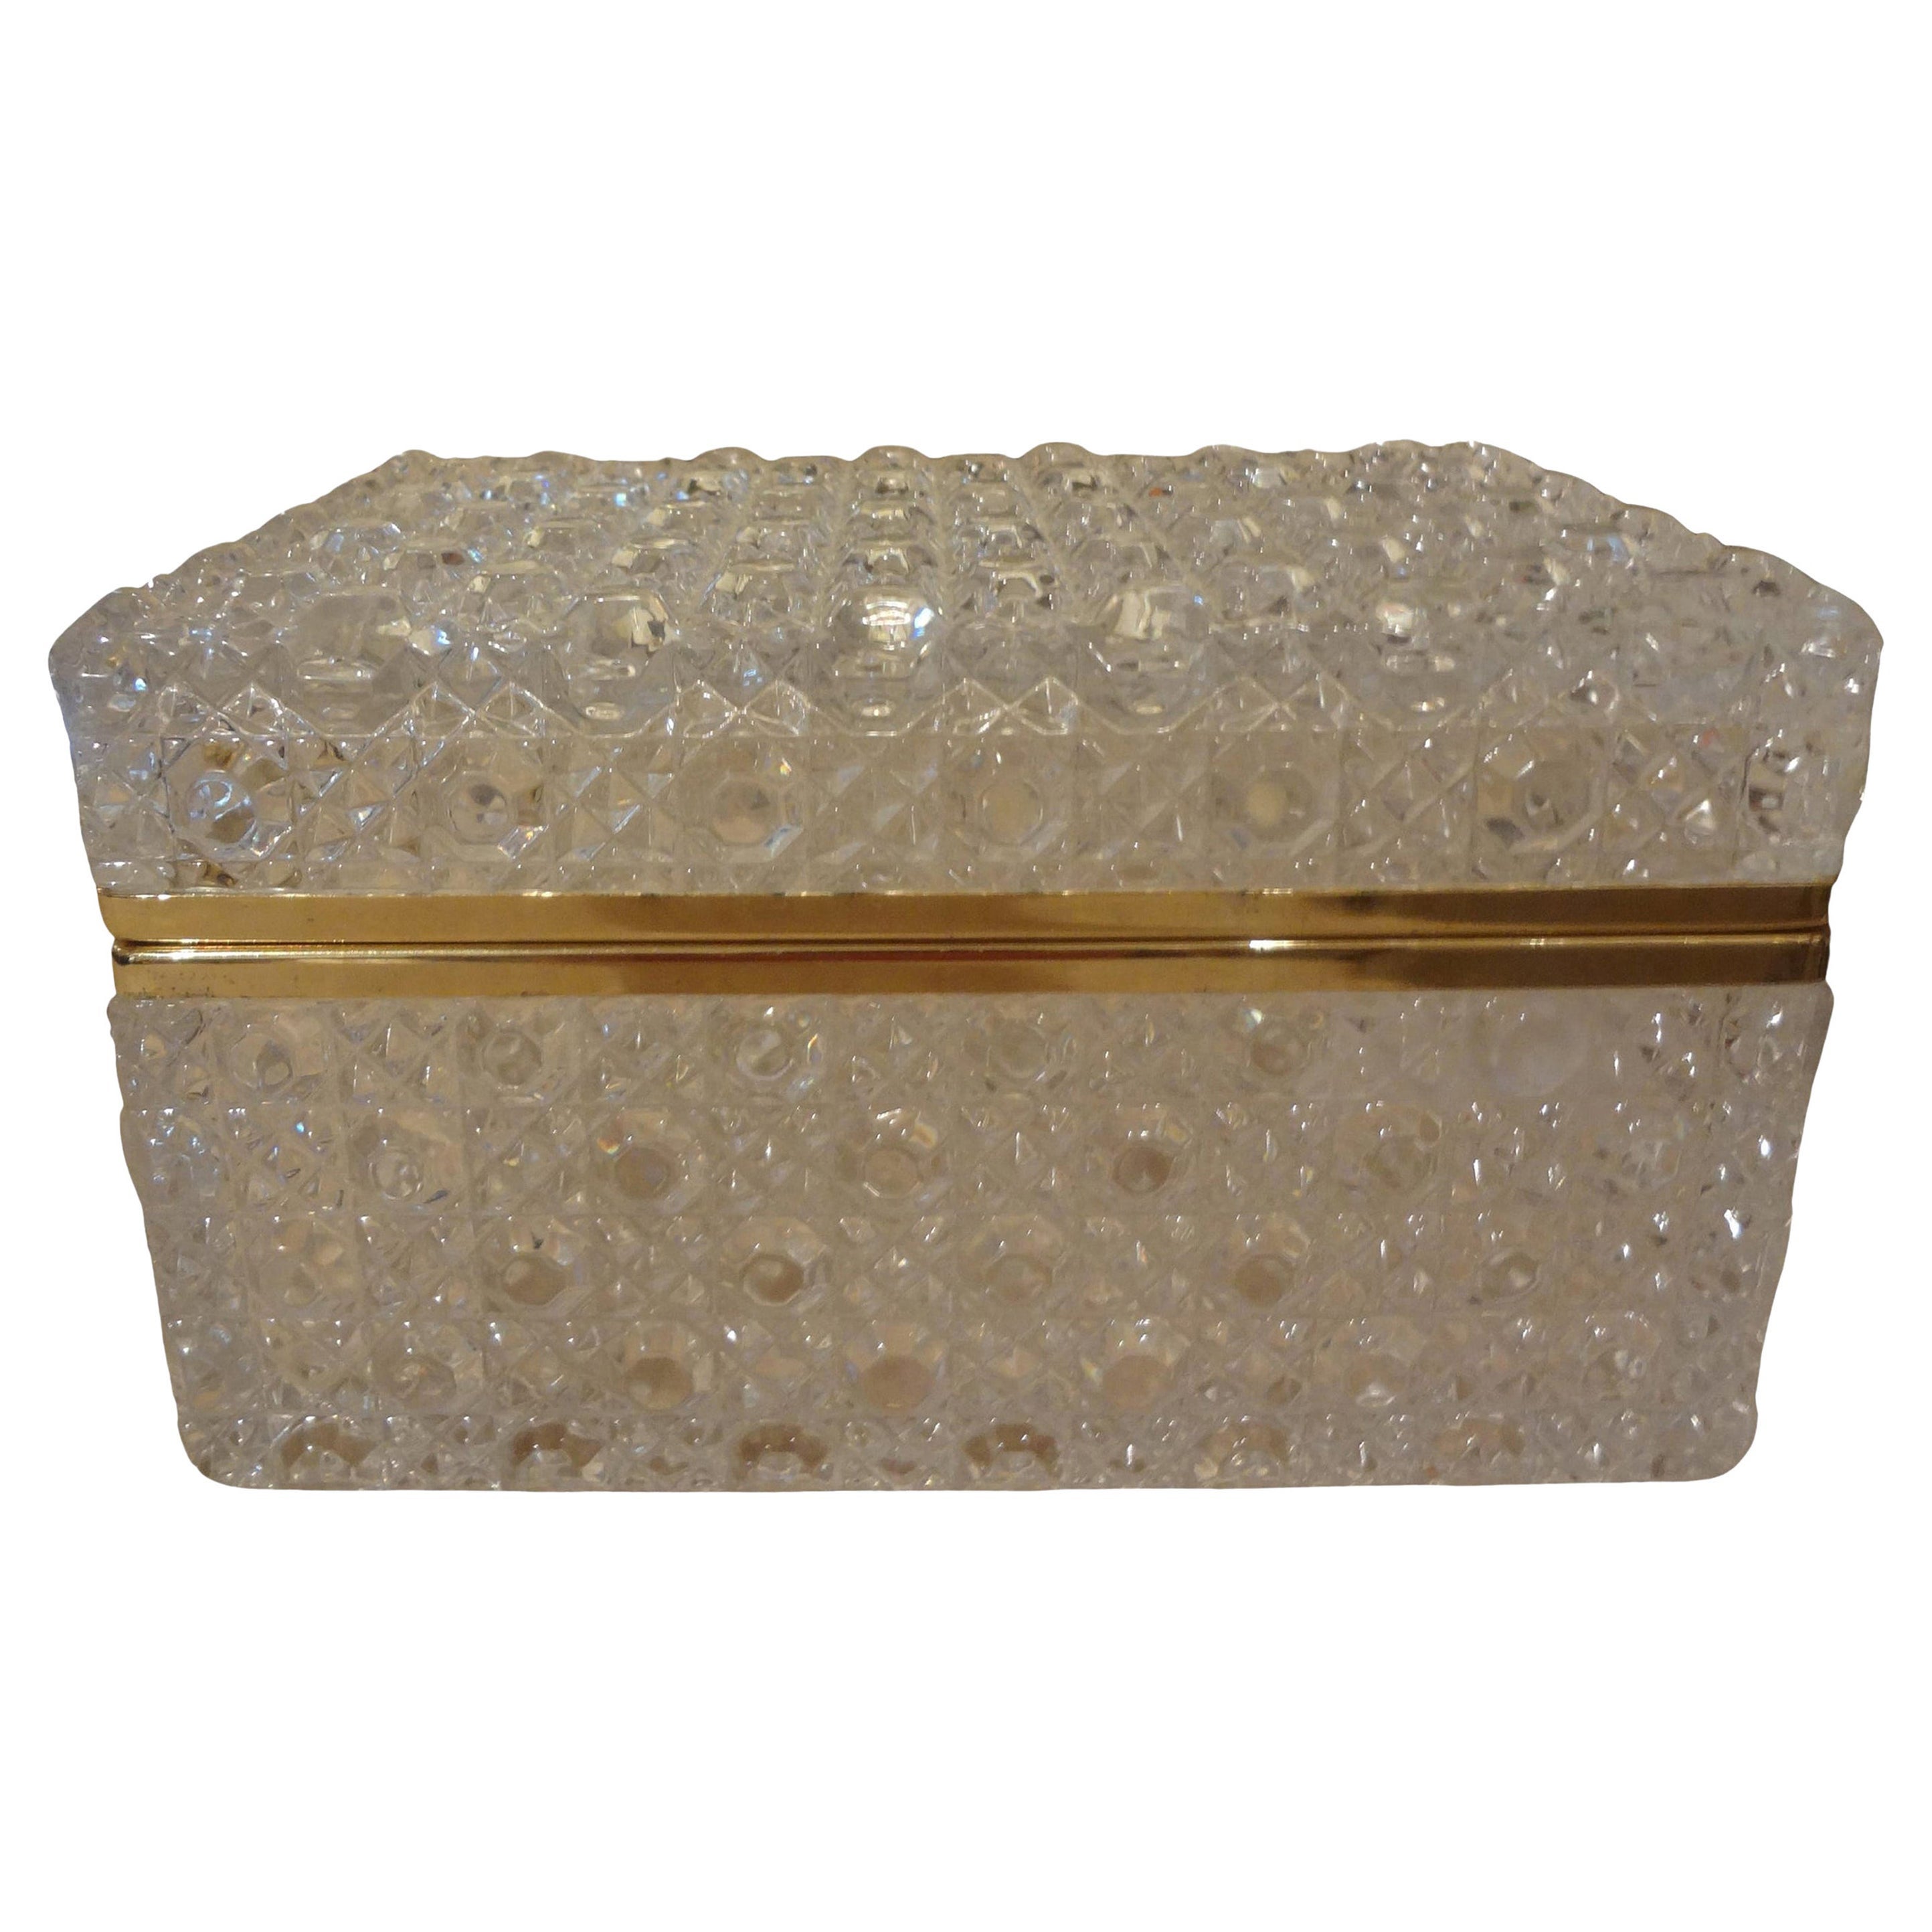 Vintage Decorative Glass Box Trimmed in Brass